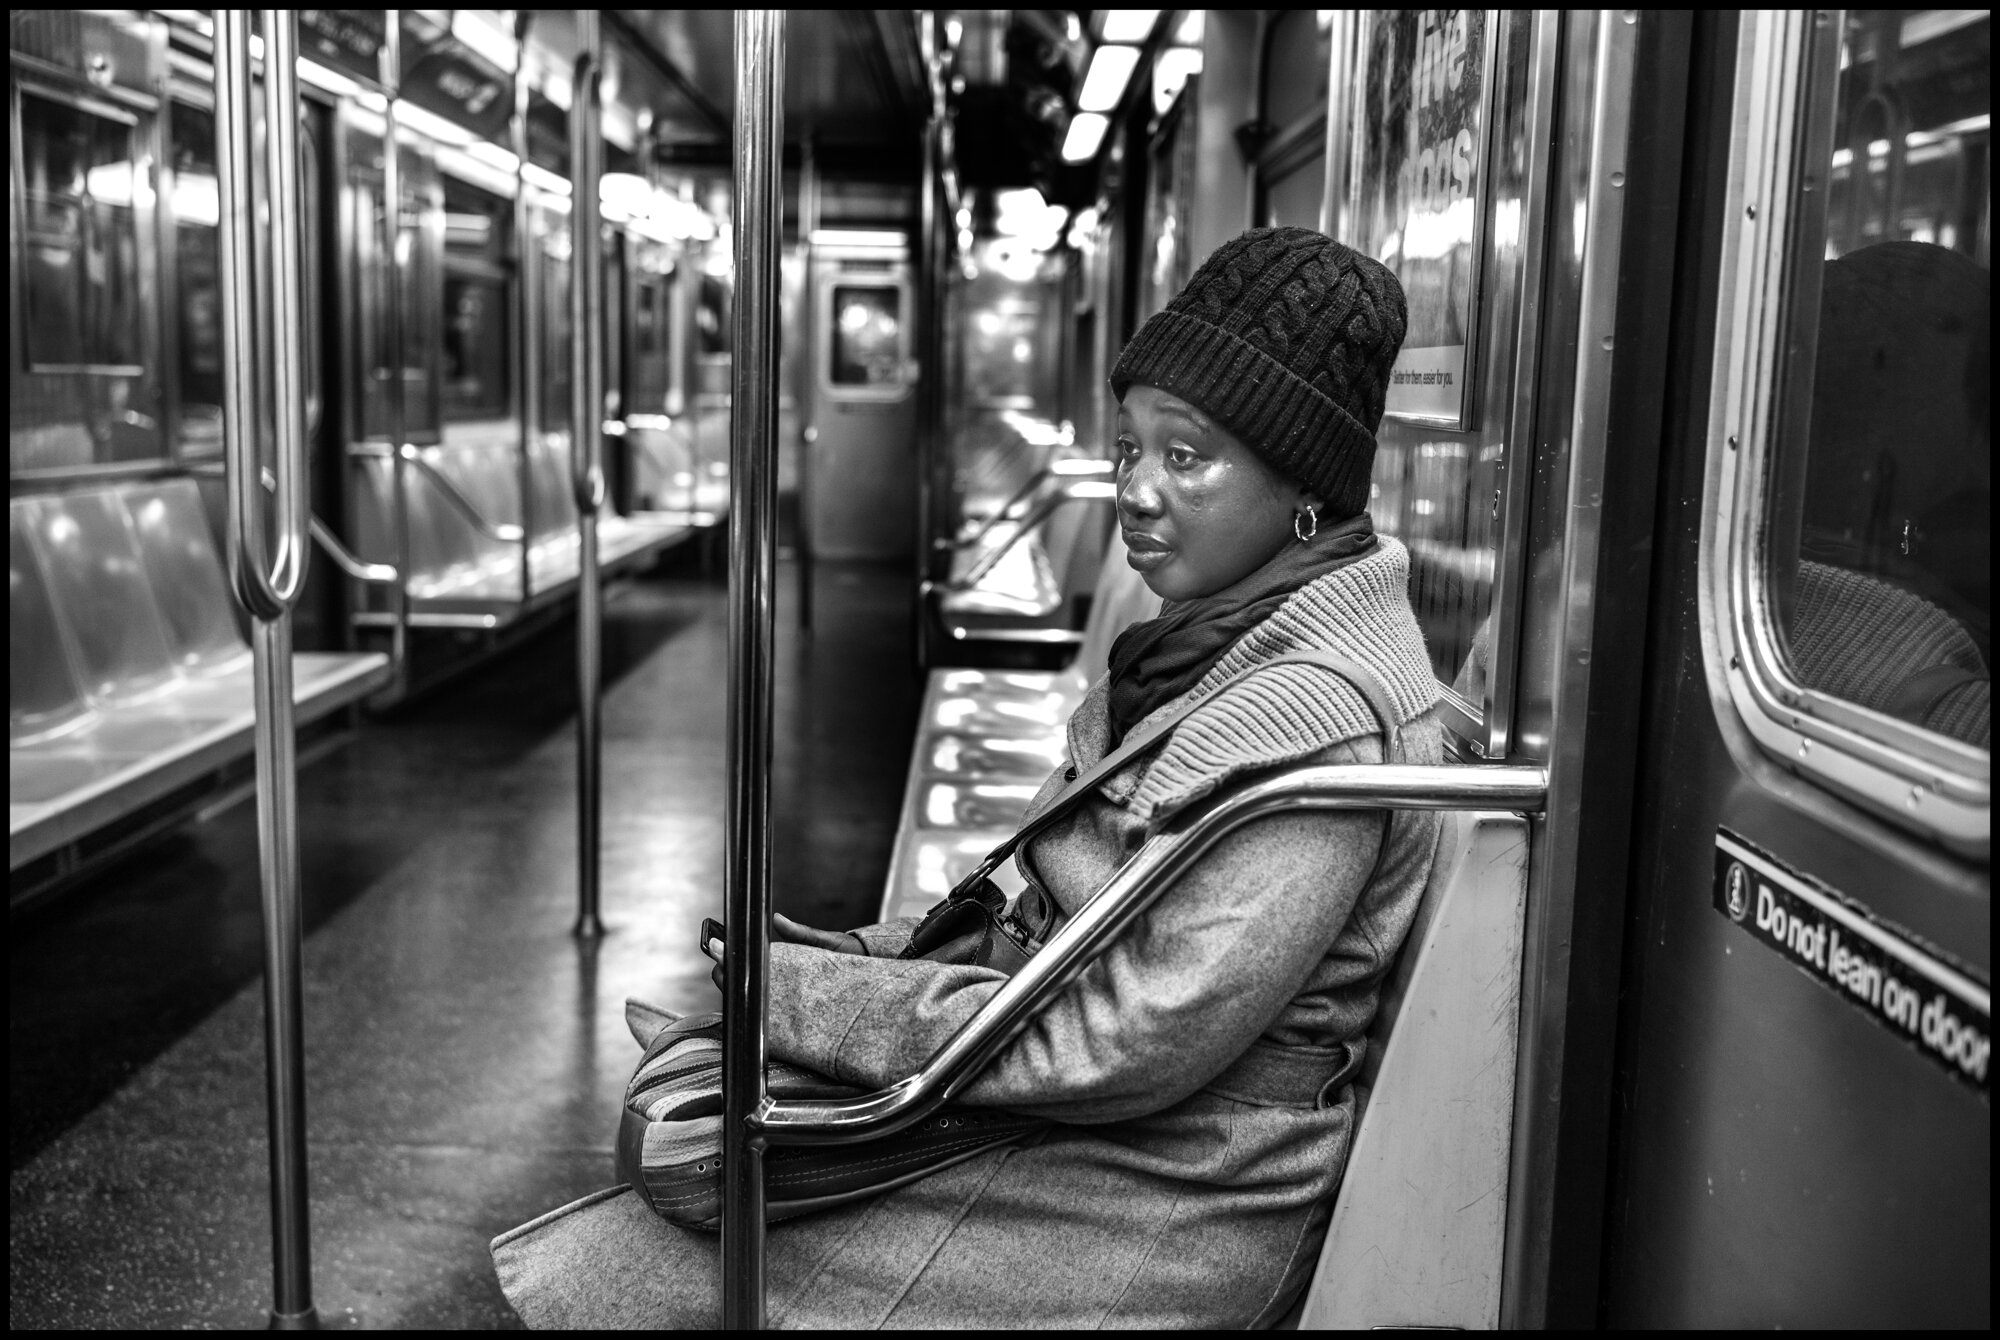  Sandra, 30, from W. Africa, rides the #1 train south alone as the only passenger in this subway car.  March 26, 2020 ©Peter Turnley  ID# 04-005 